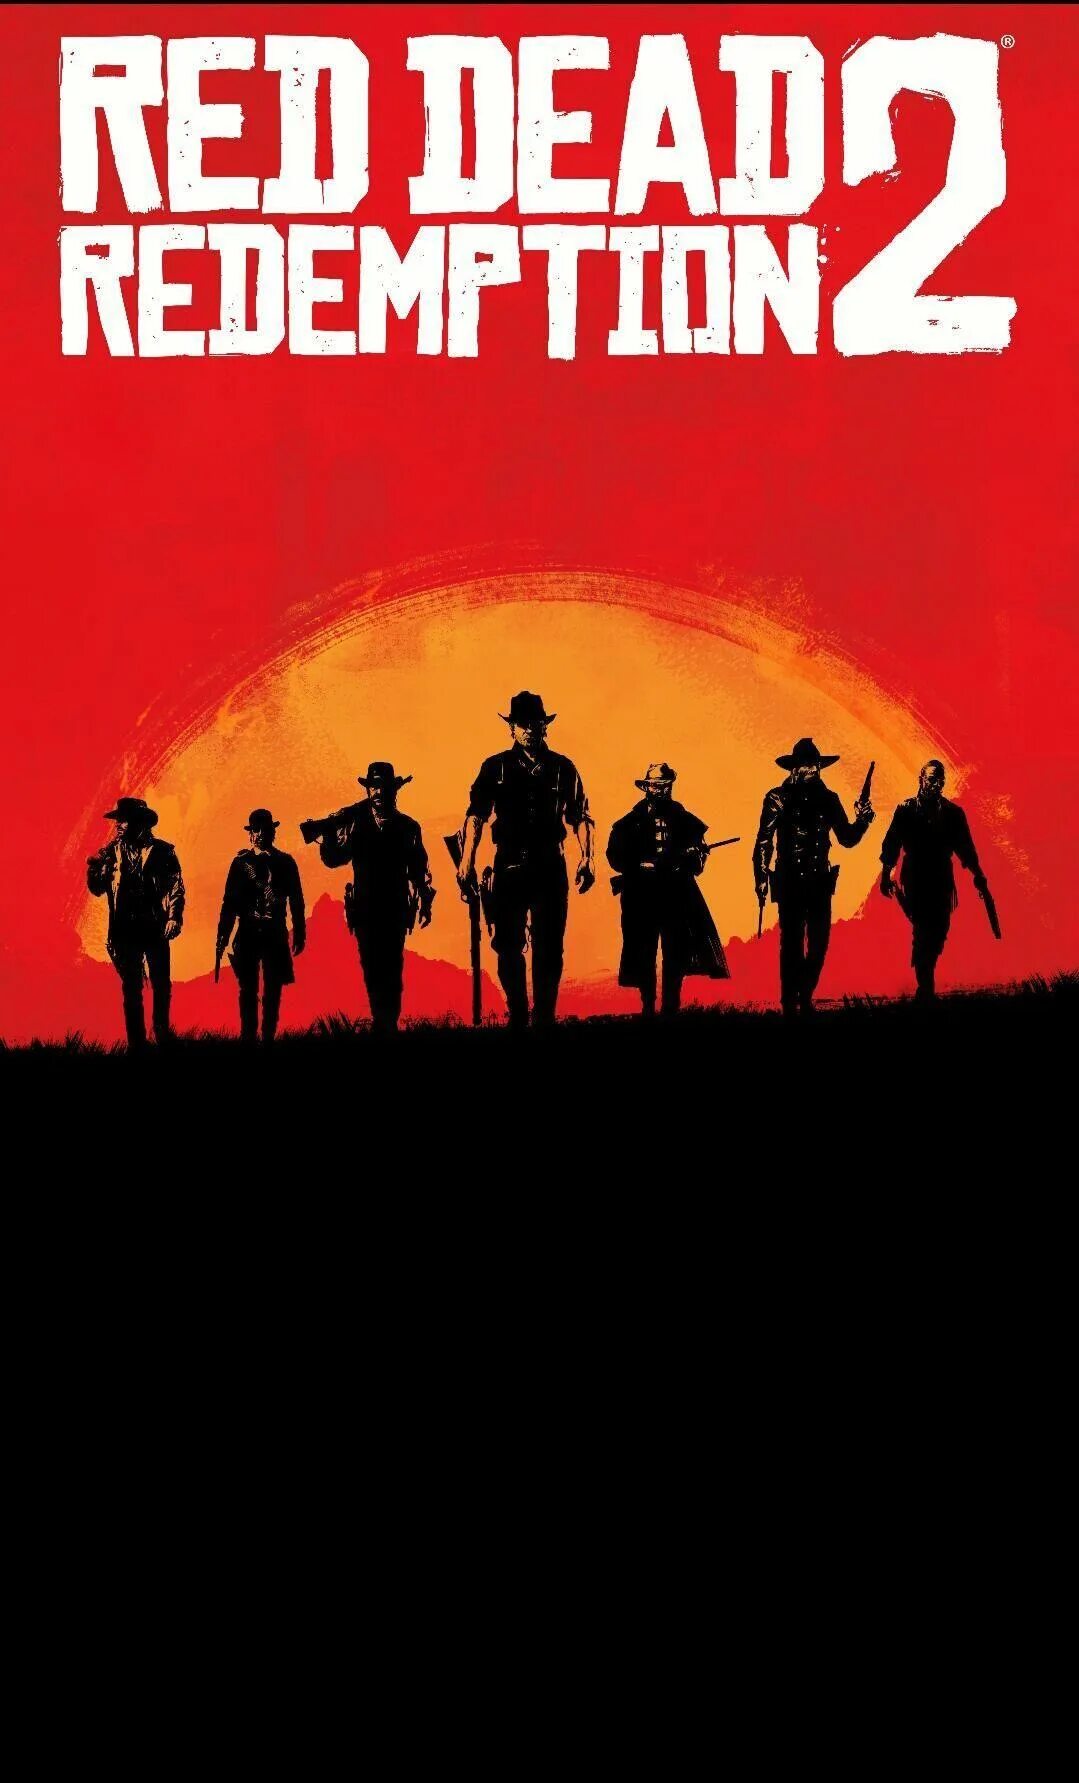 Рдр 2 плакат. Red Dead Redemption 2. Red Dead Redemption 2 poster. Red Dead Redemption 1 Постер. Red Dead Redemption 2 Постер.